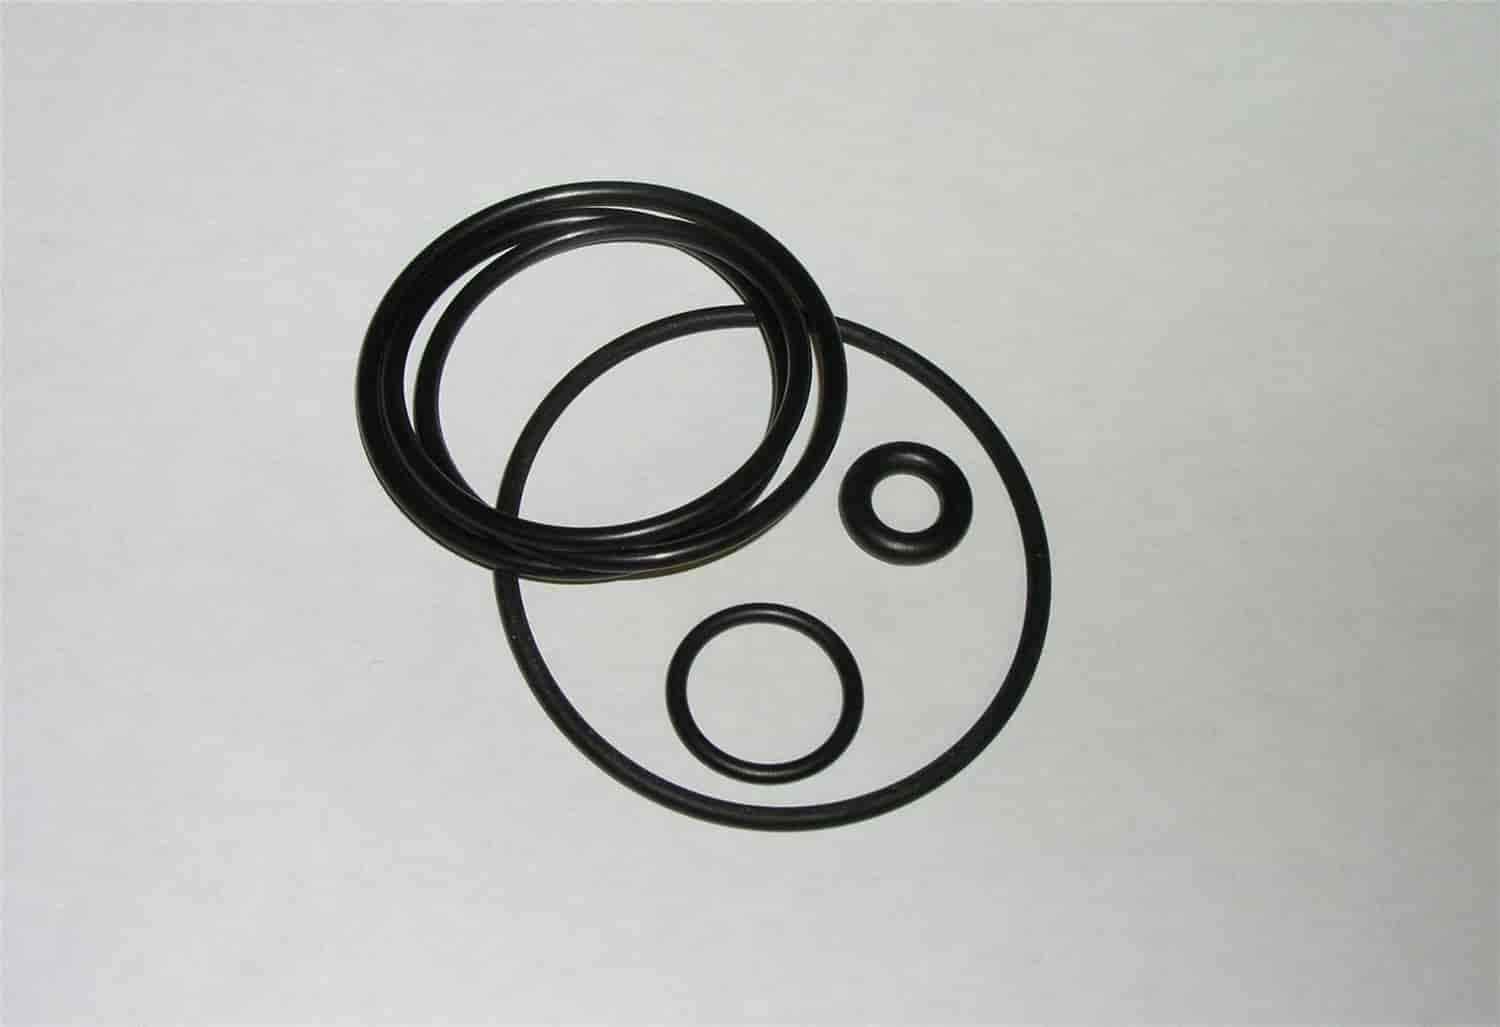 REPLACEMENT O-RING FITS VARIOUS WATERNECKS AND SPACERS